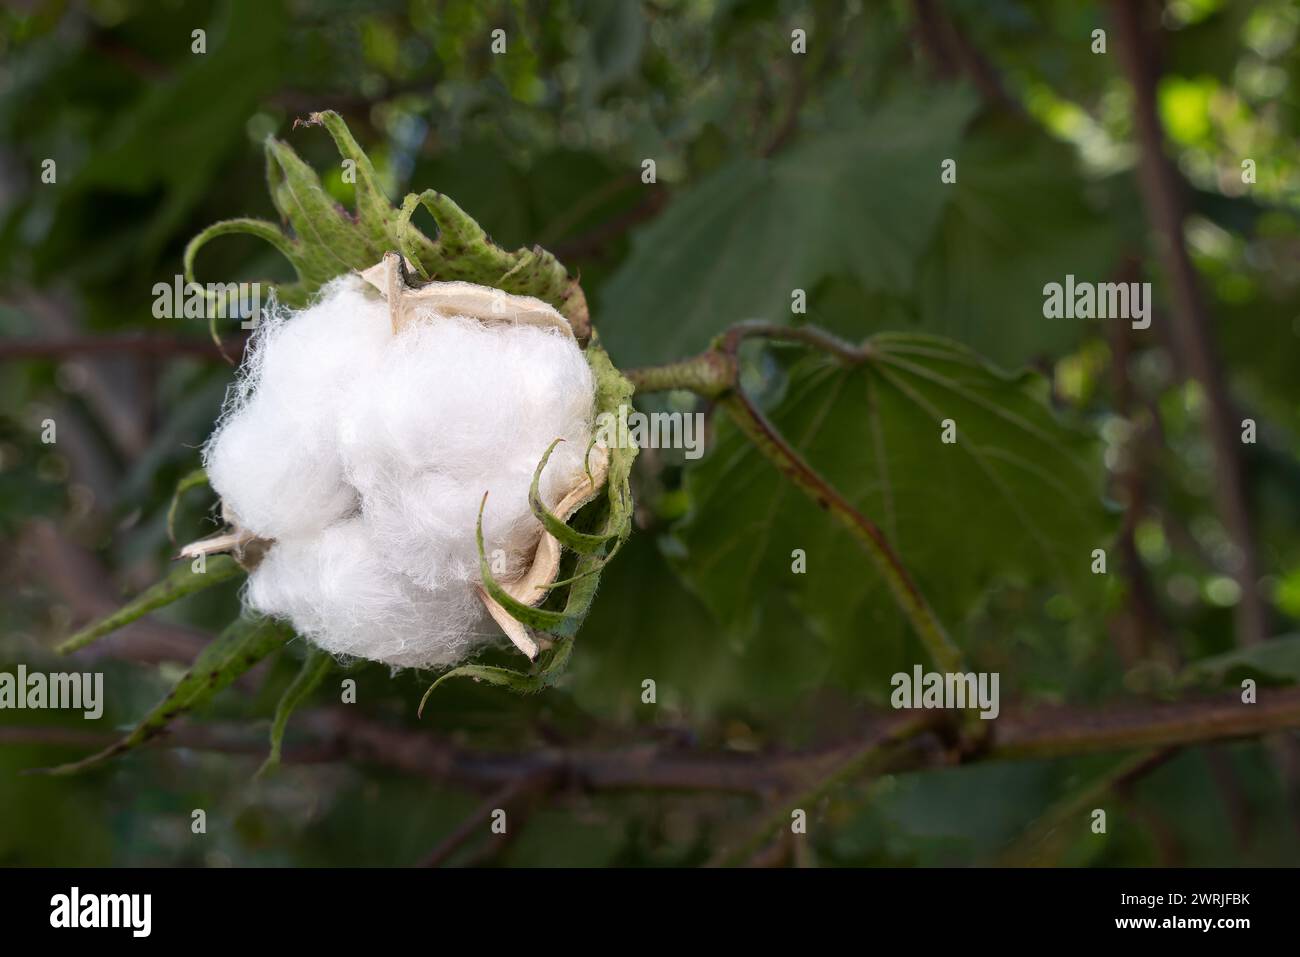 A Gossypium arboreum, cotton plant, with space for text Stock Photo